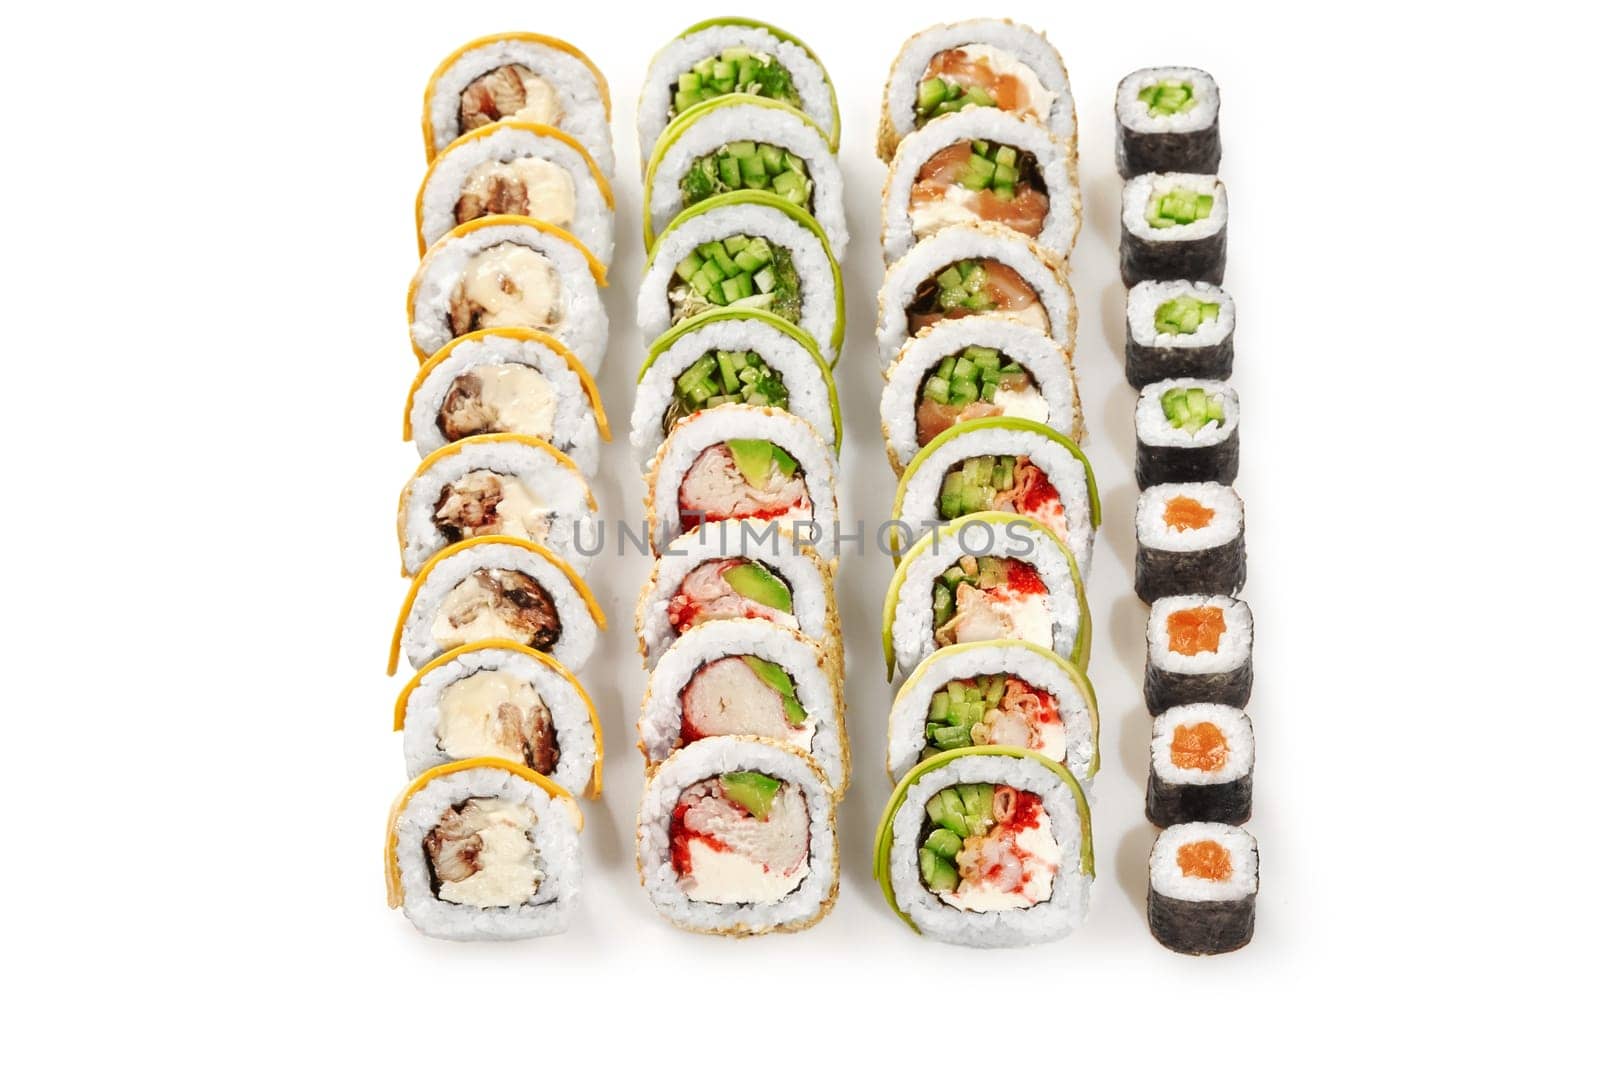 Delicious set for Japanese style friendly dinner of simple norimaki and various uramaki rolls filled with eel, salmon, shrimp and vegetables, lined up isolated on white background